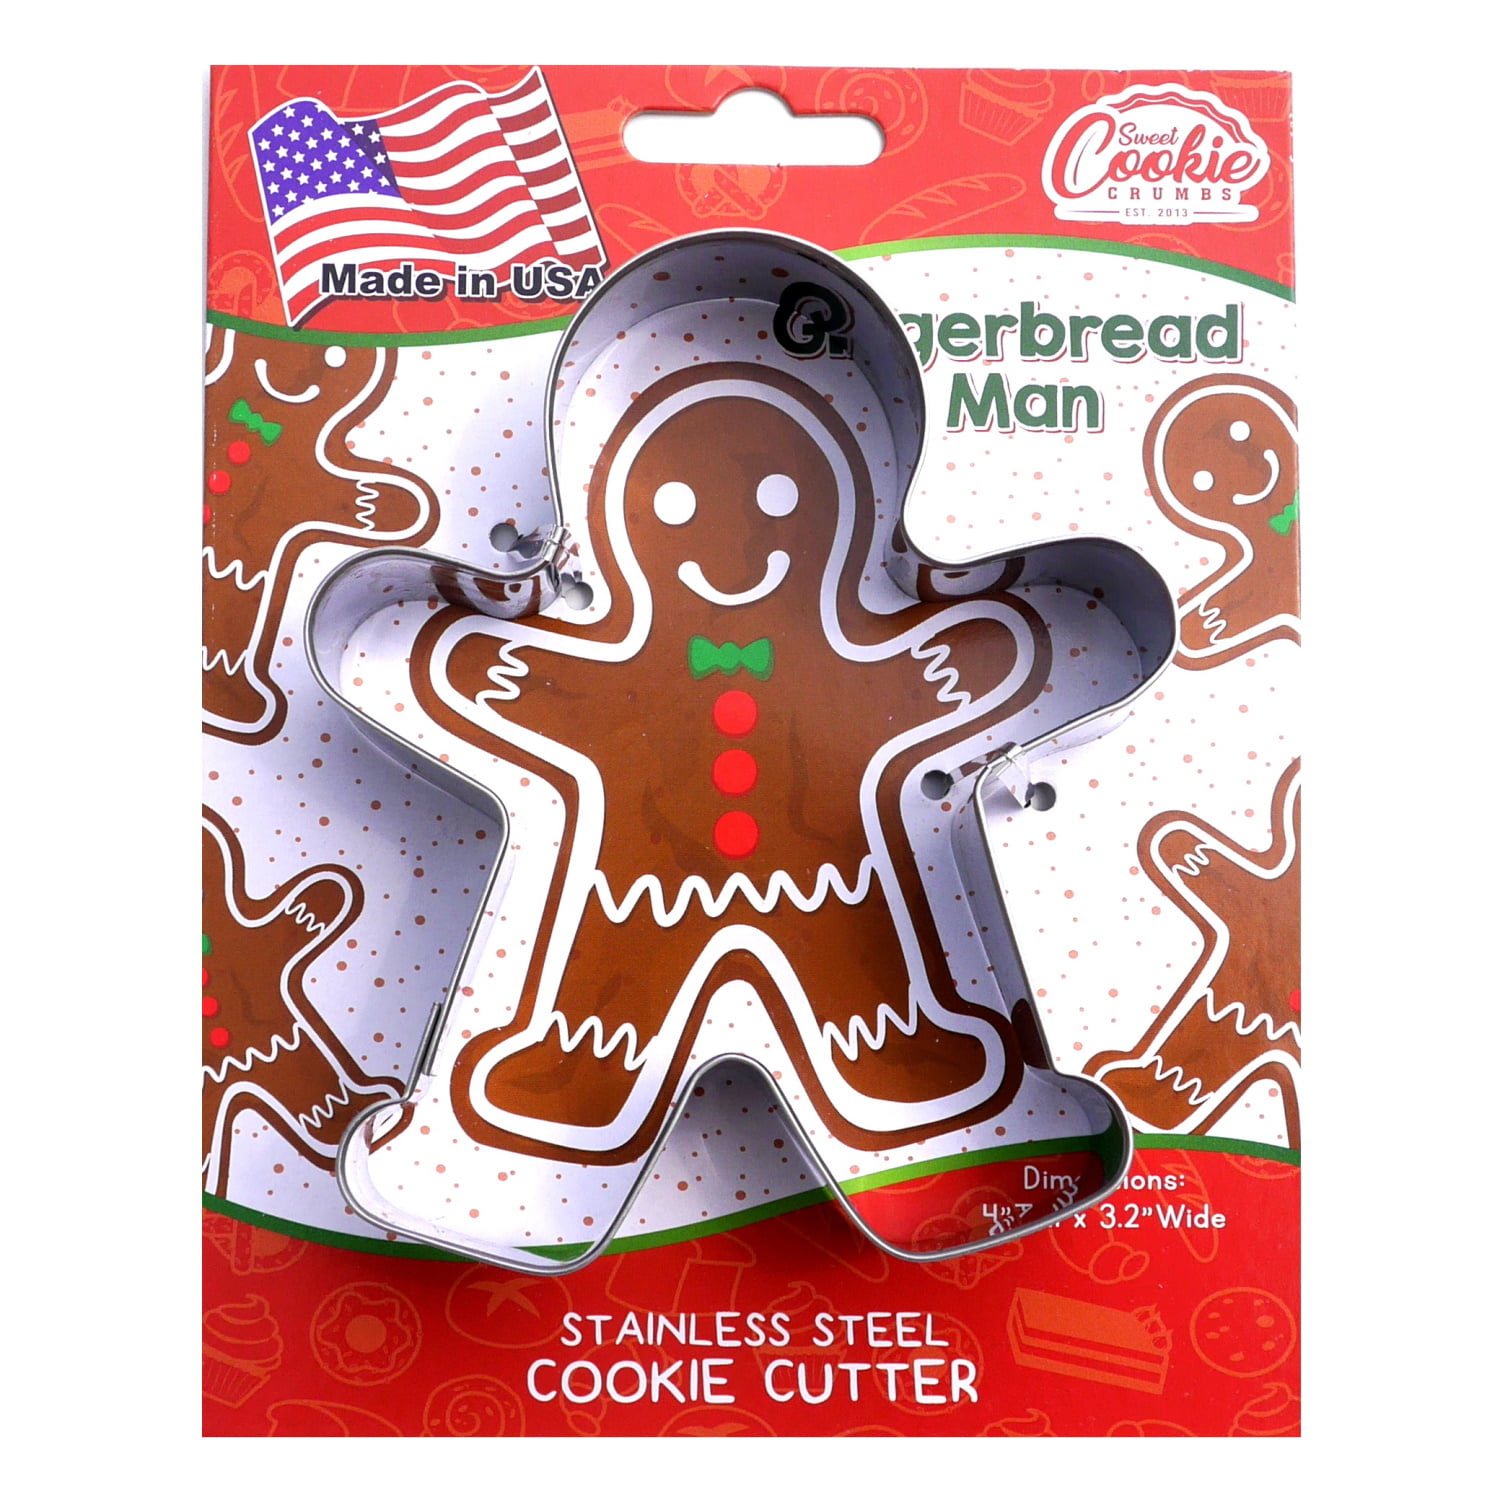 NEW Christmas Gingerbread Man Girl Cookie Cutter & Accessories in Cloth Gift Bag